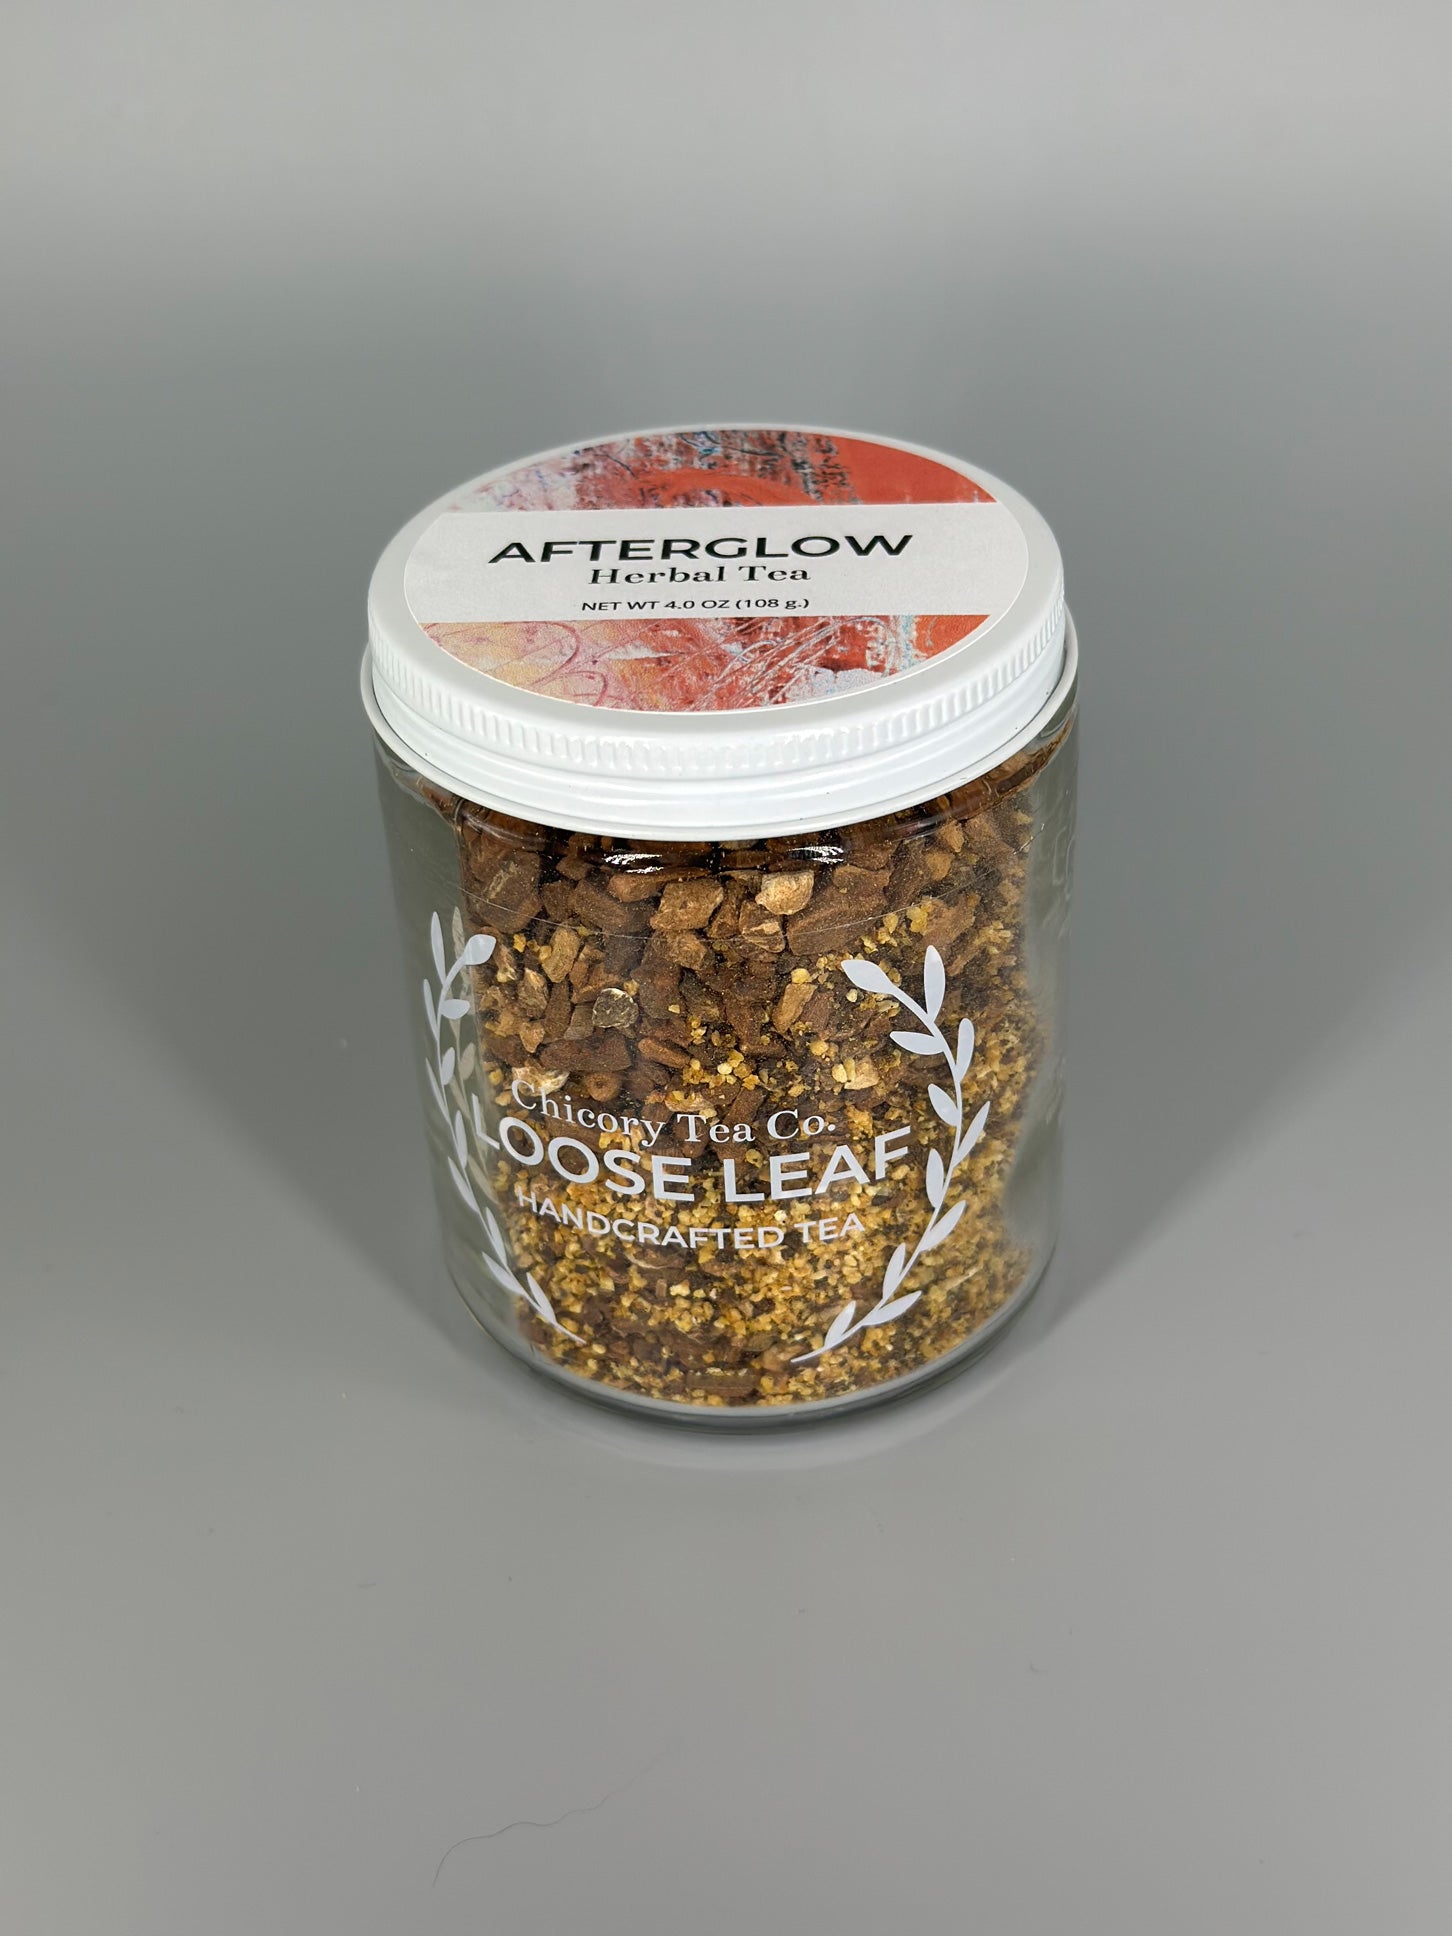 Chicory Tea Co.'s Afterglow Herbal Tea in jar, view from front